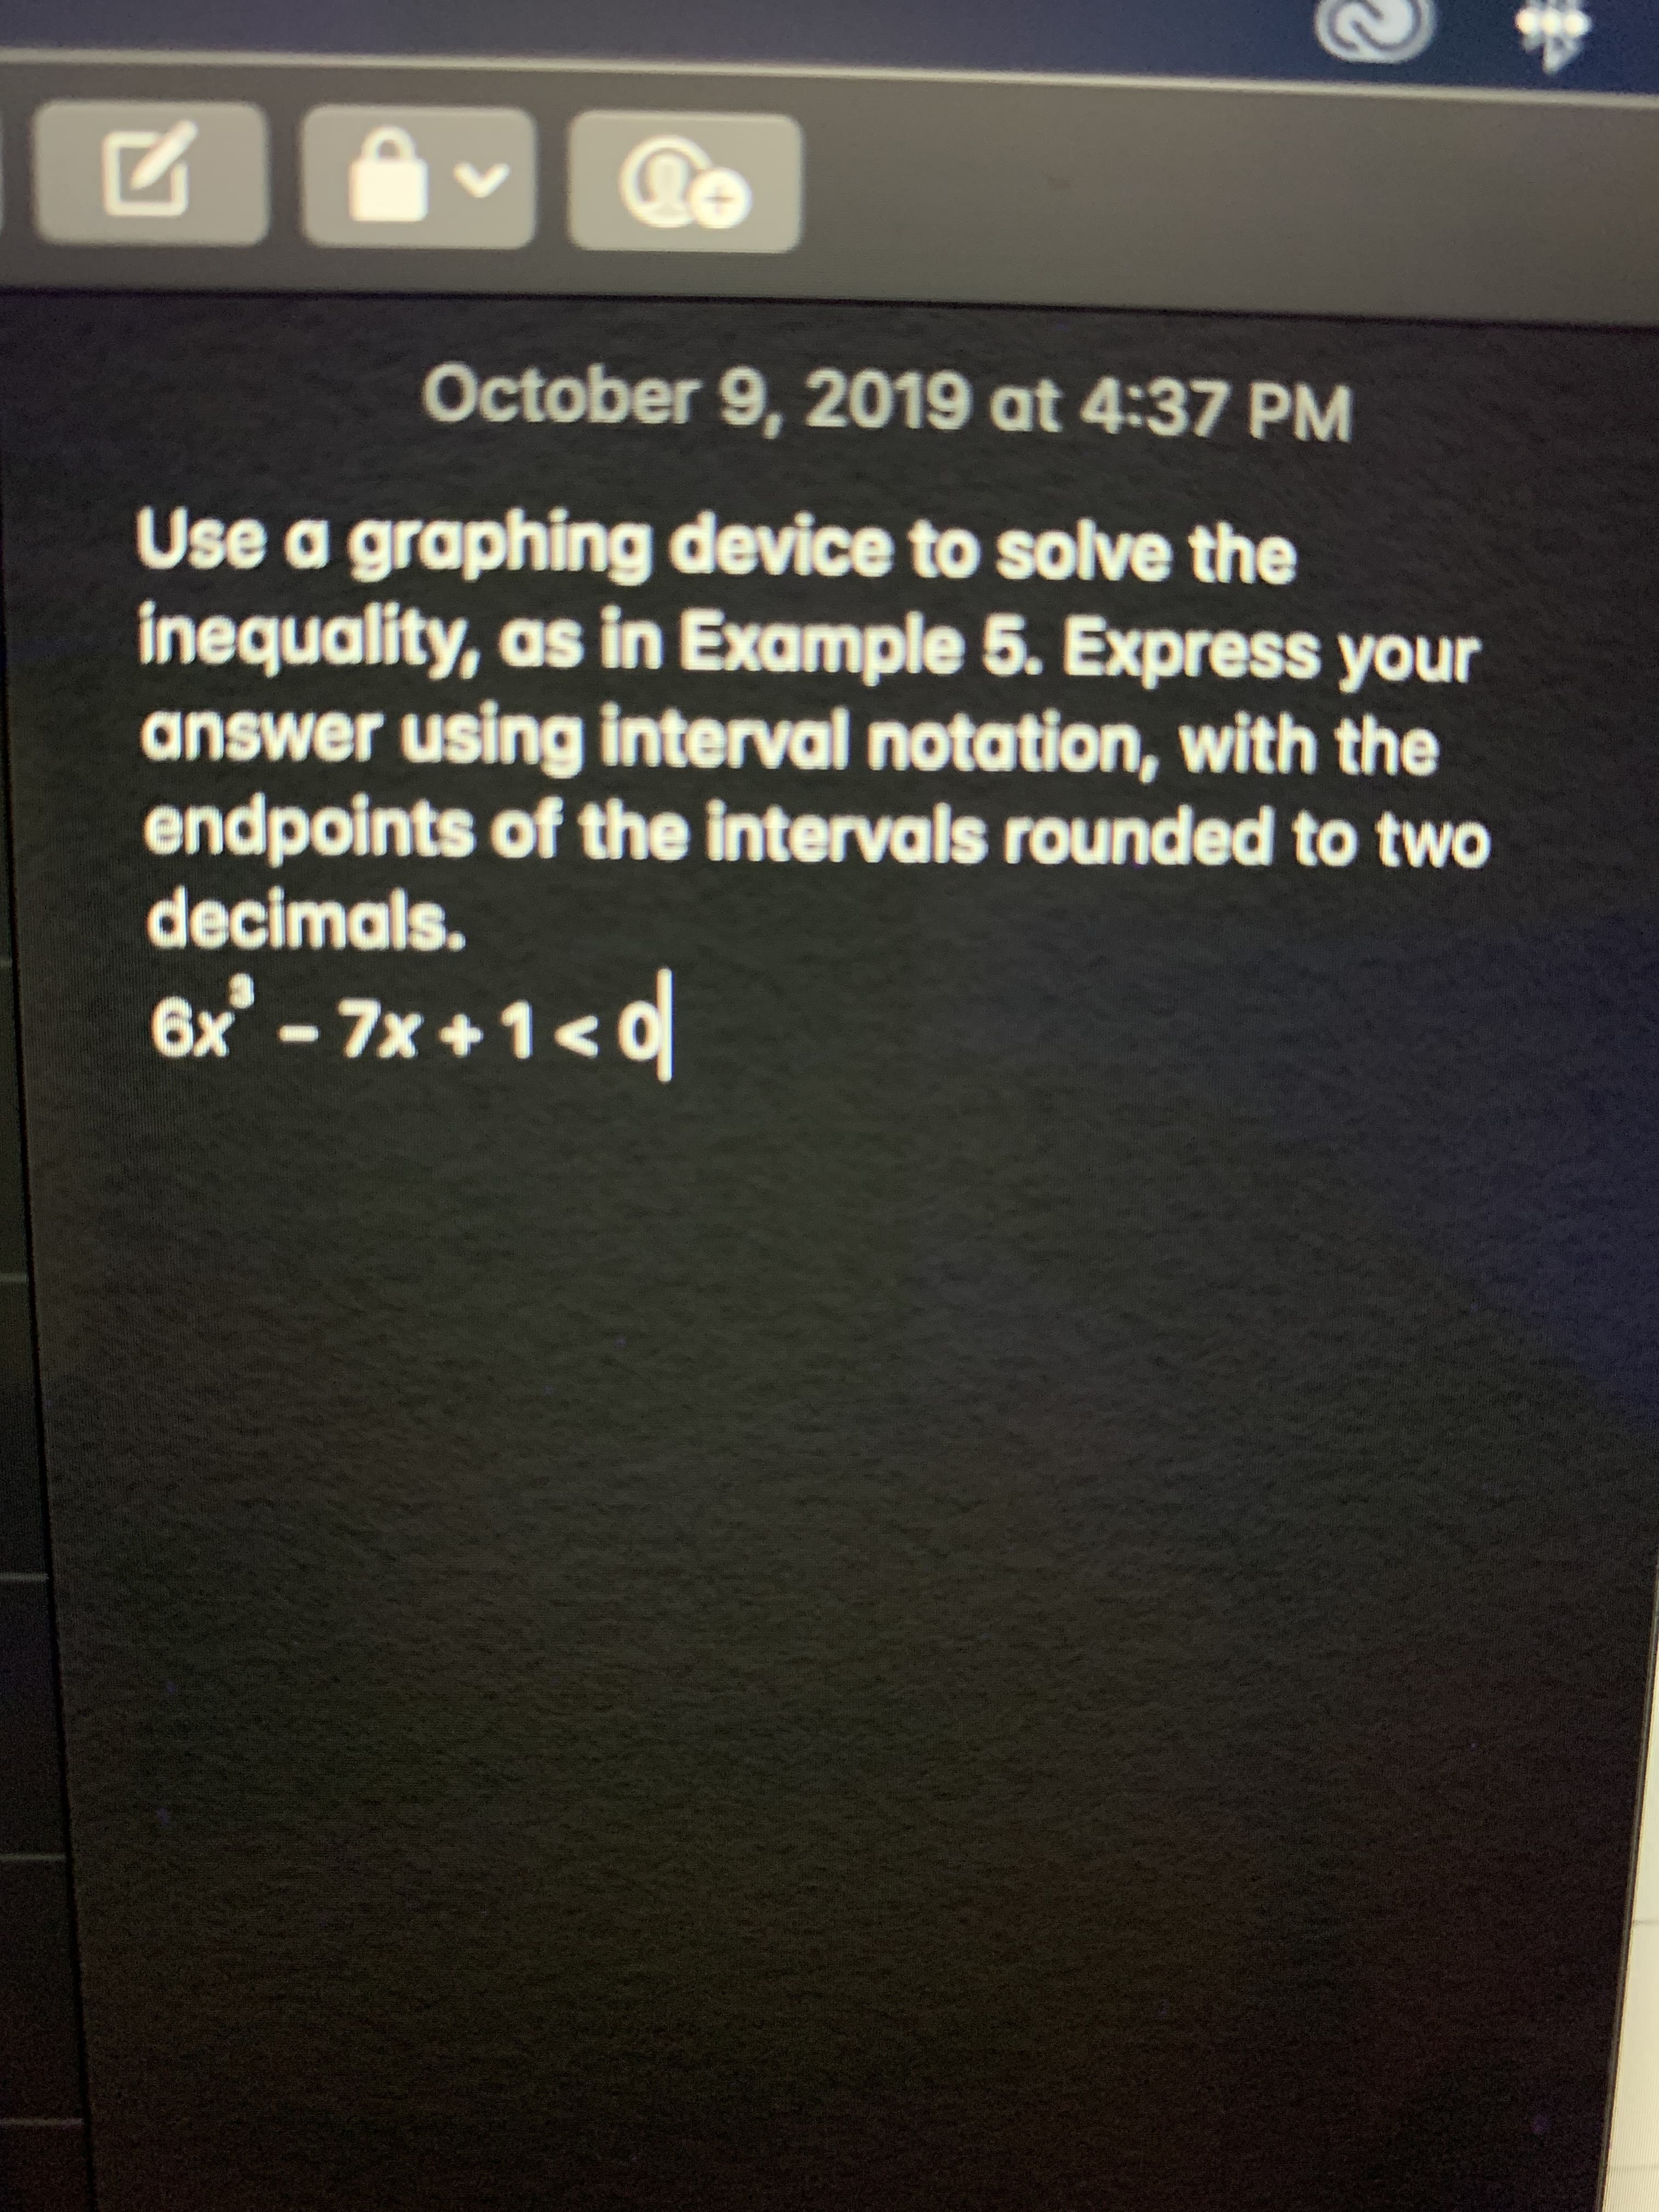 V
October 9, 2019 at 4:37 PM
Use a graphing device to solve the
inequality, as in Example 5. Express your
answer using interval notation, with the
endpoints of the intervals rounded to two
decimals
6x-7x+1<
